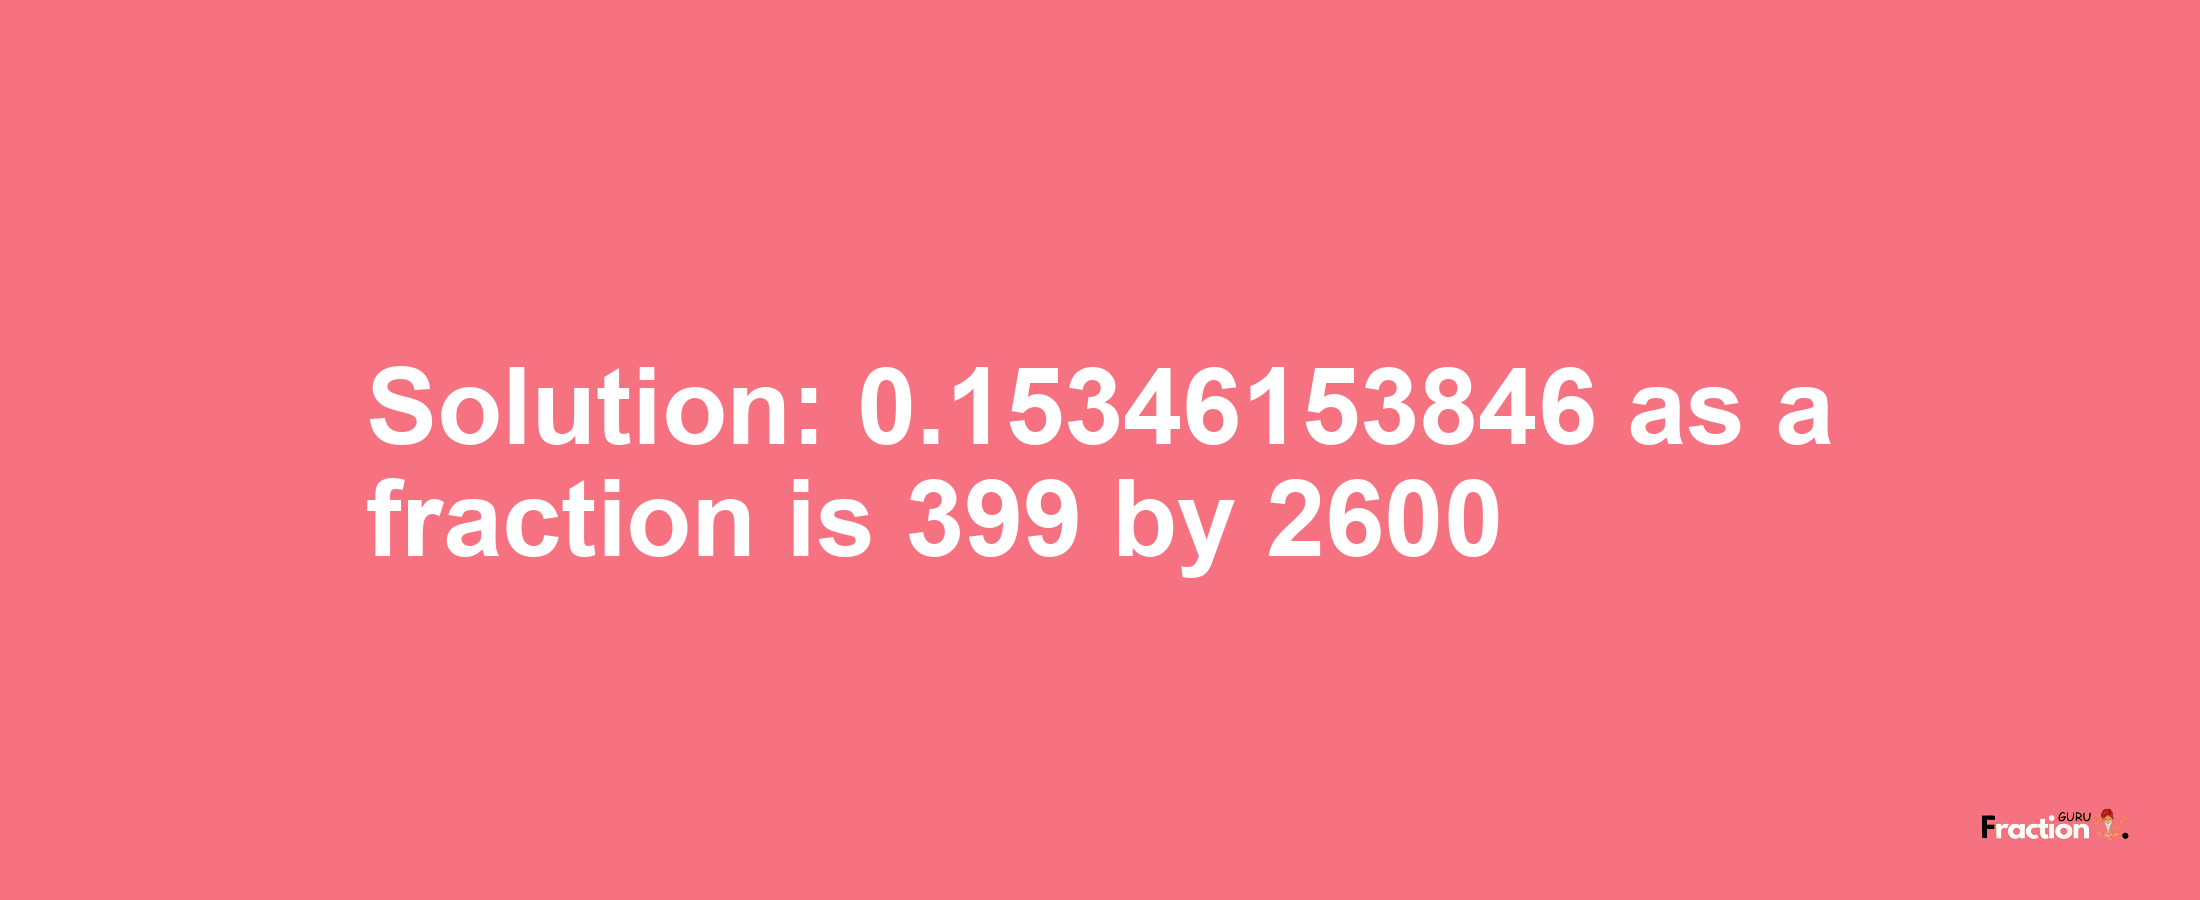 Solution:0.15346153846 as a fraction is 399/2600